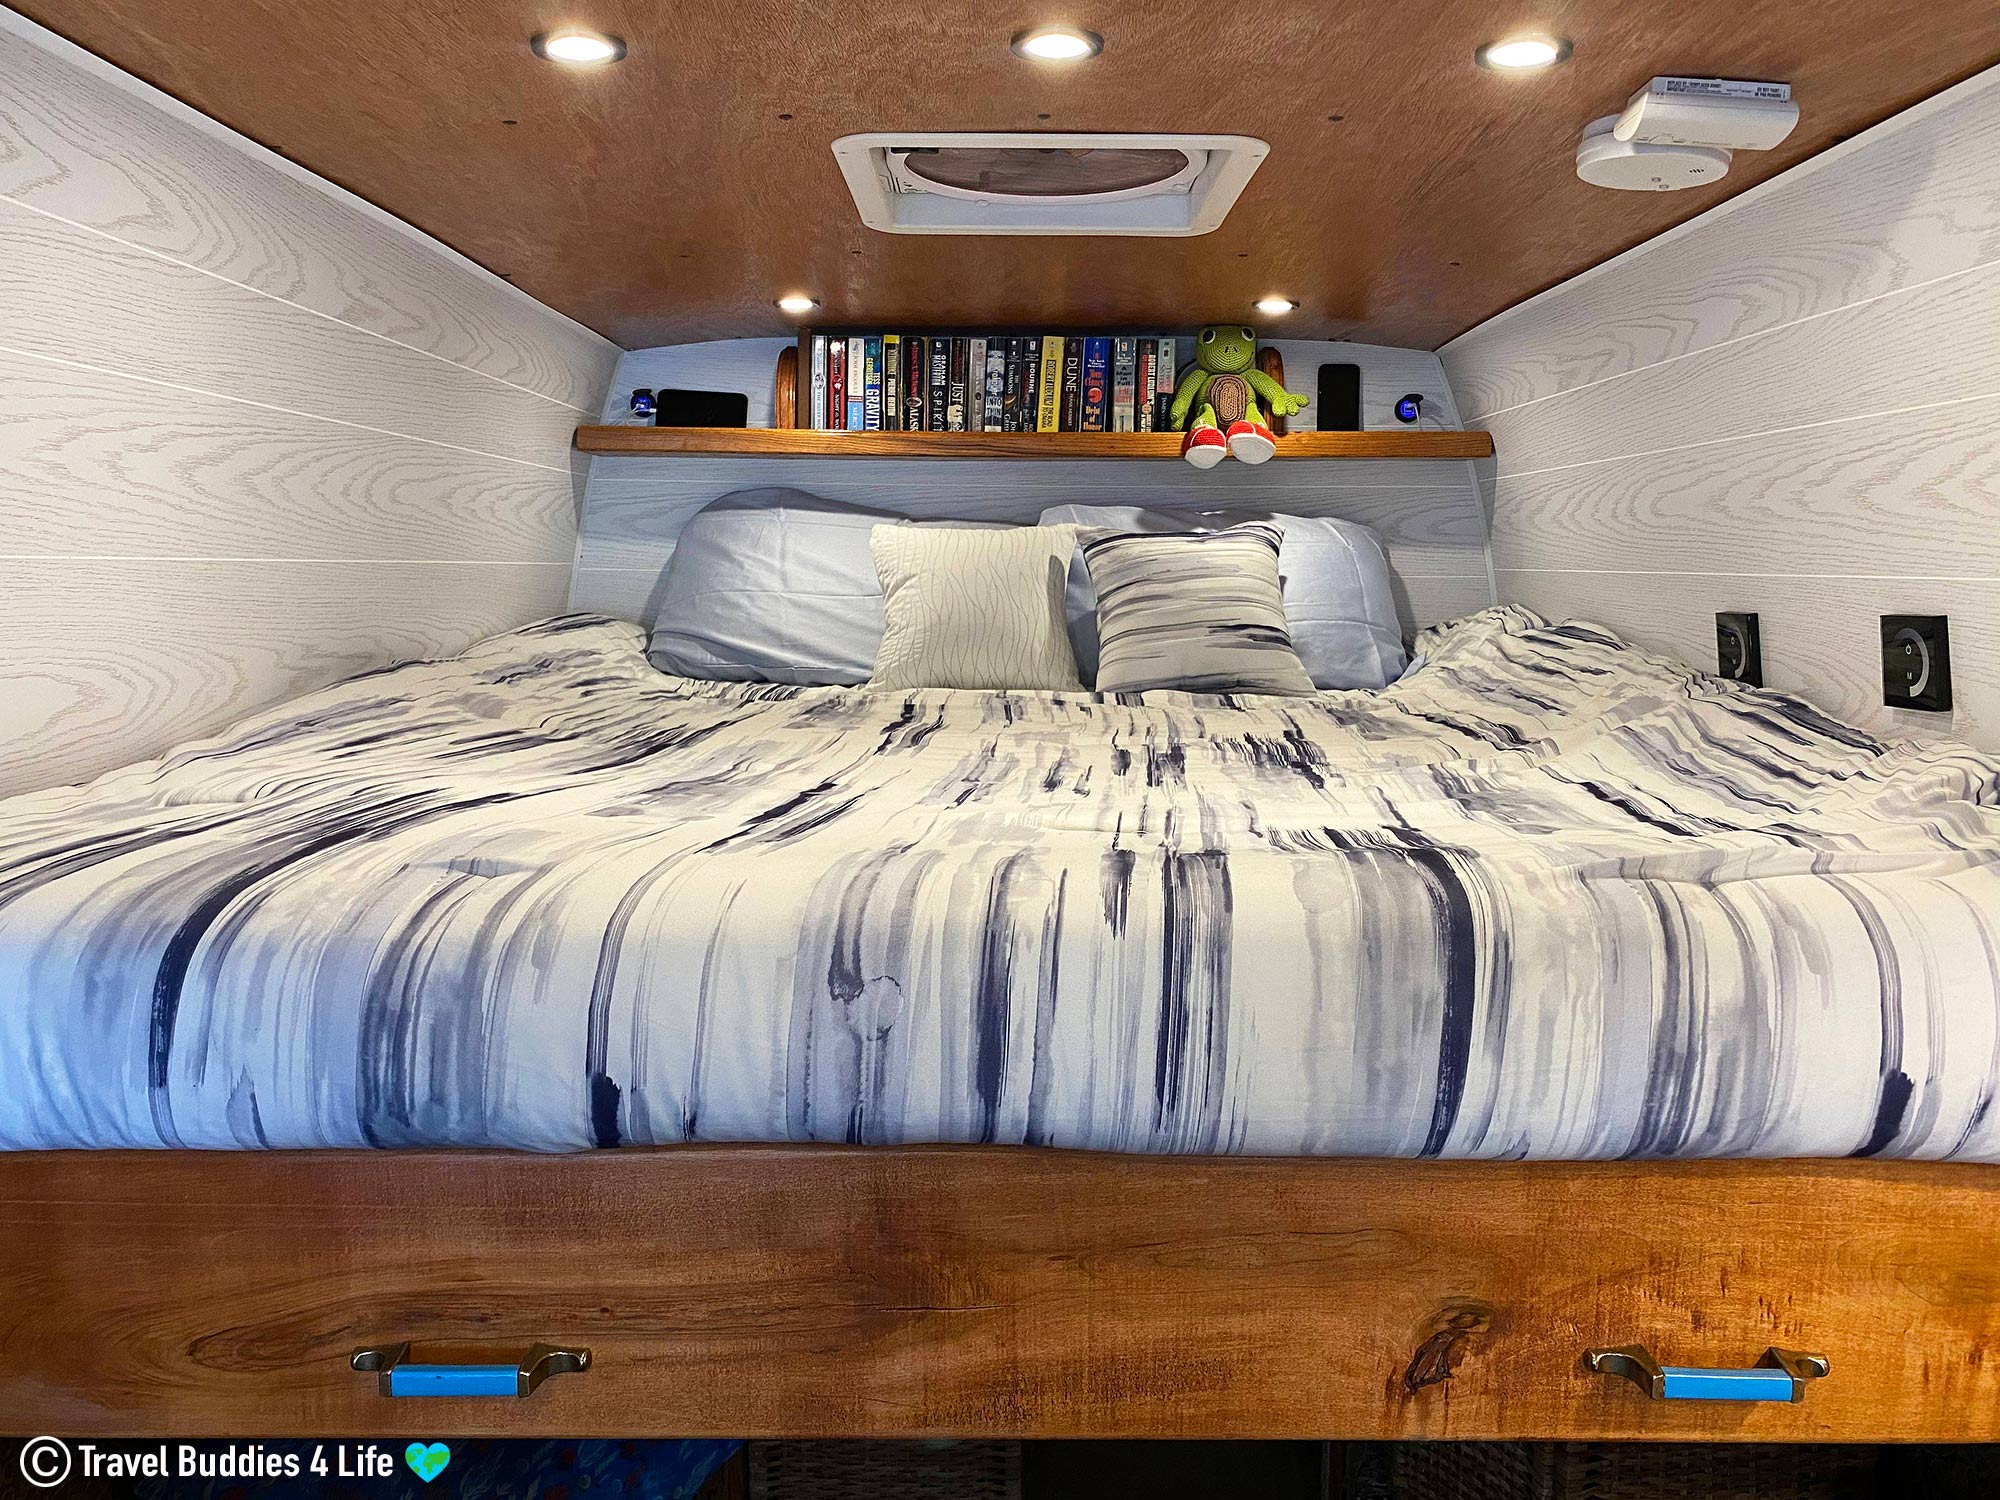 The Bed Section Of Dive Buddies Scuba Diving Sprinter Van Conversion